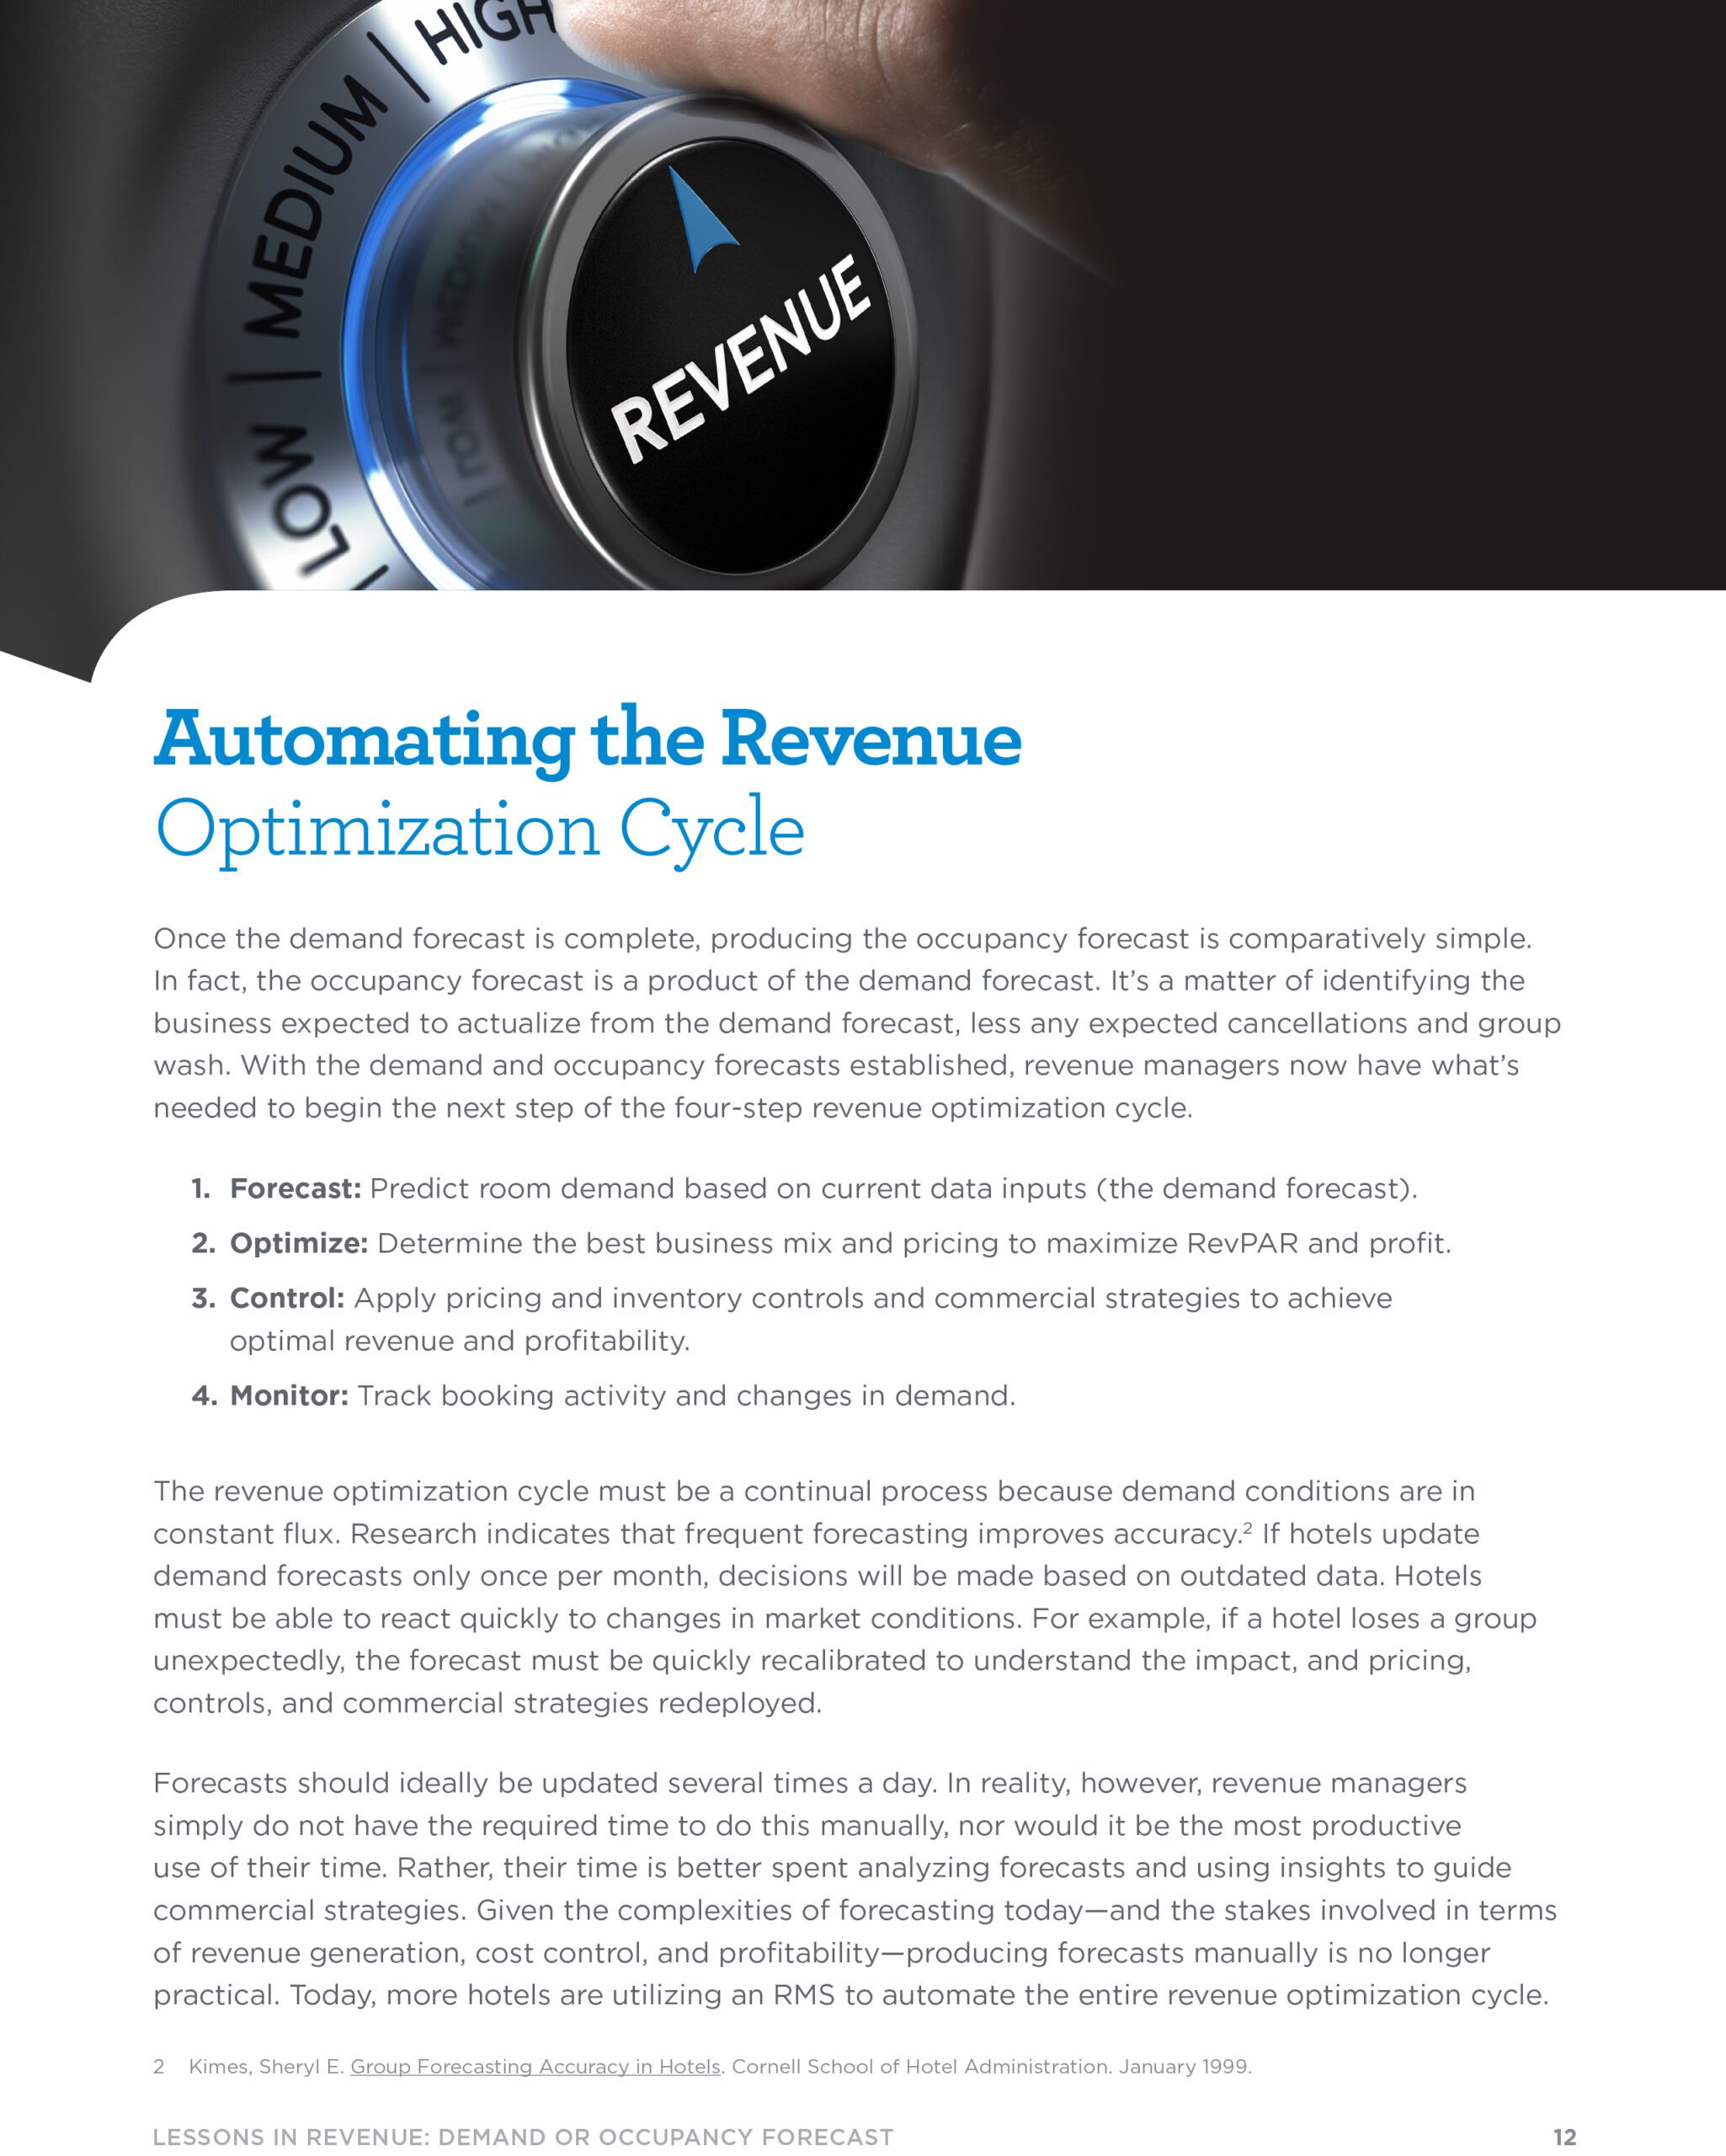 Page 11 - Automating the Revenue Optimization Cycle